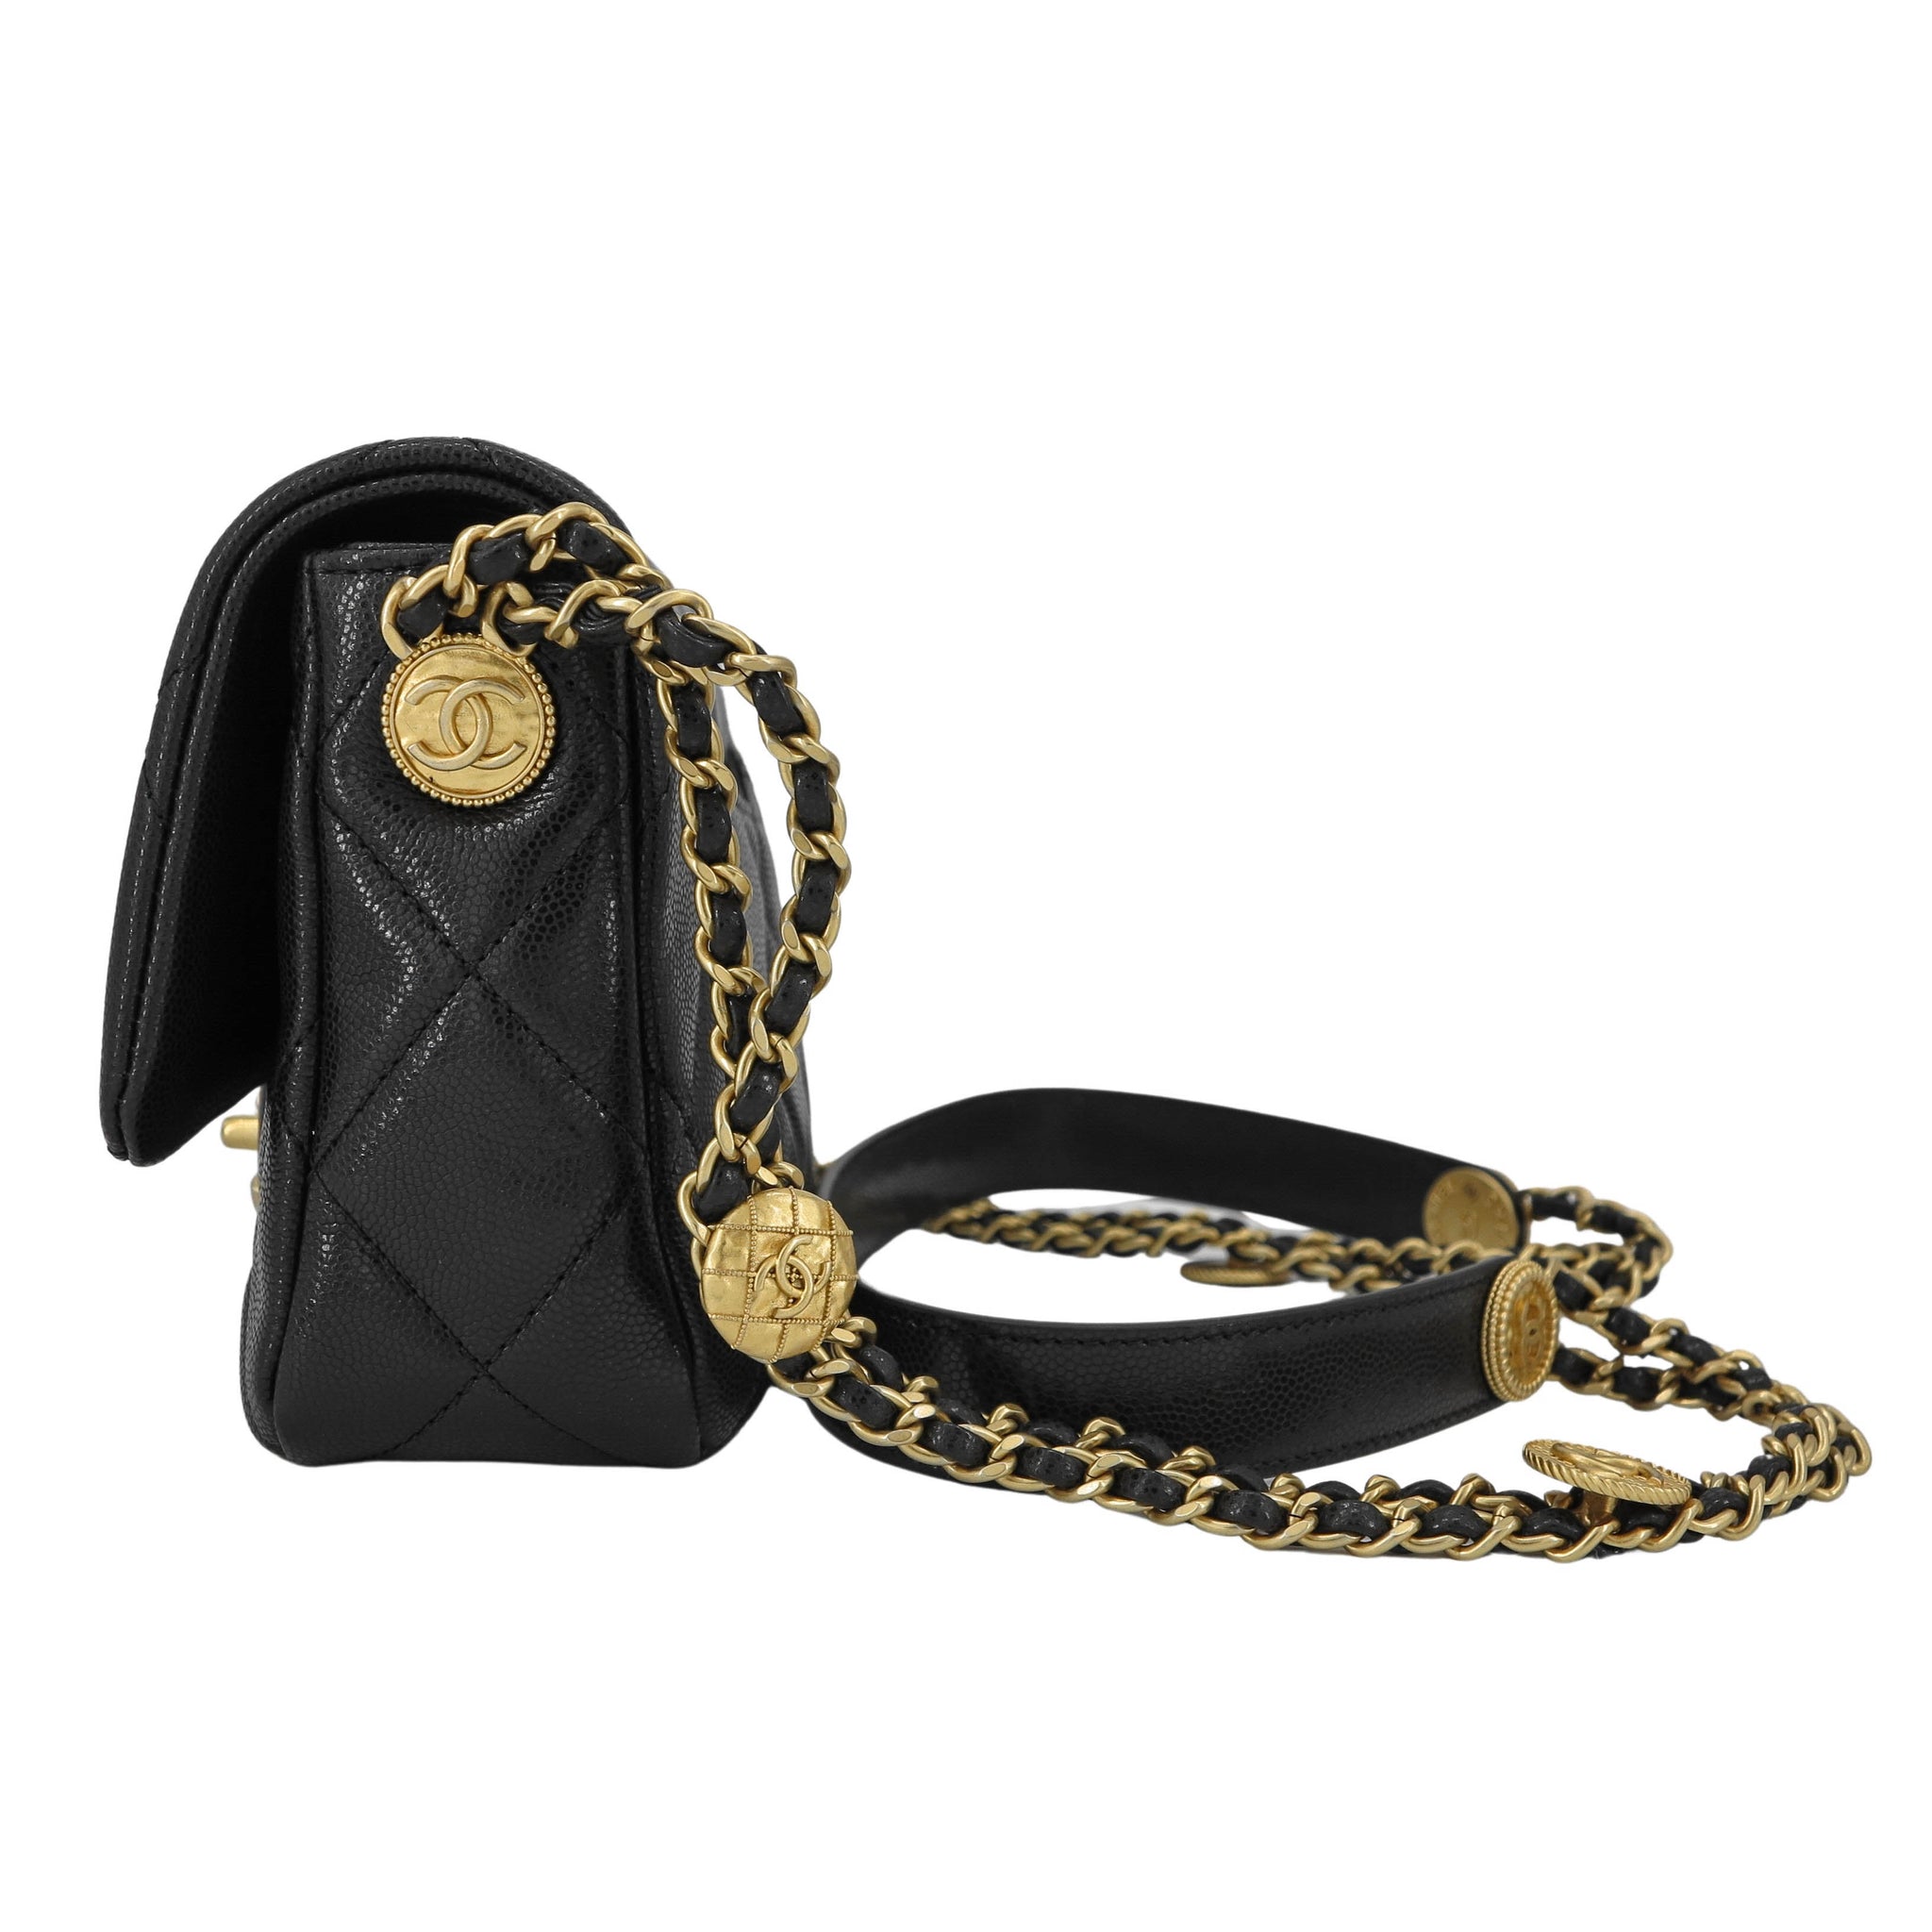 CHANEL 22A Gold Coins Small Flap Bag in Black Caviar | Dearluxe